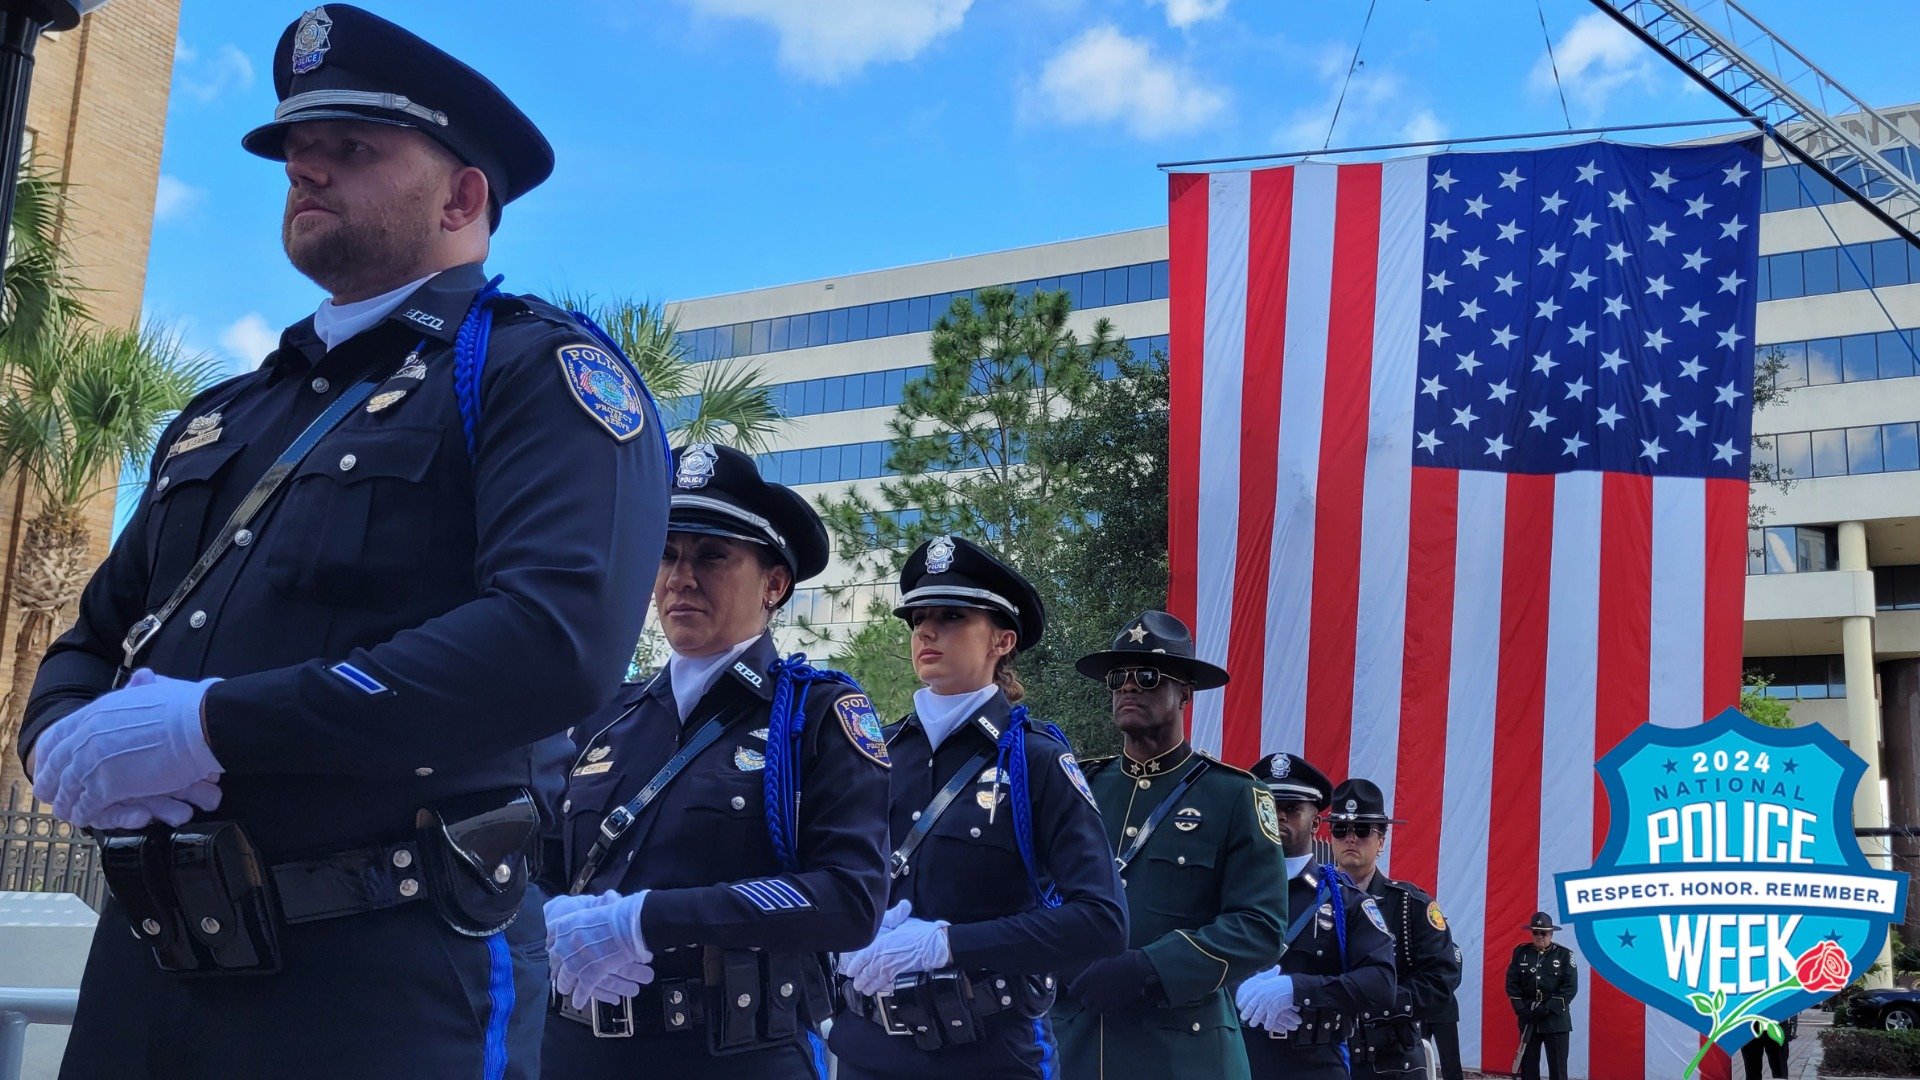 Today marks the start of National Police Week, a time to honor those who protect our community and remember the fallen officers who paid the ultimate sacrifice. 
#PoliceWeek #LawEnforcement